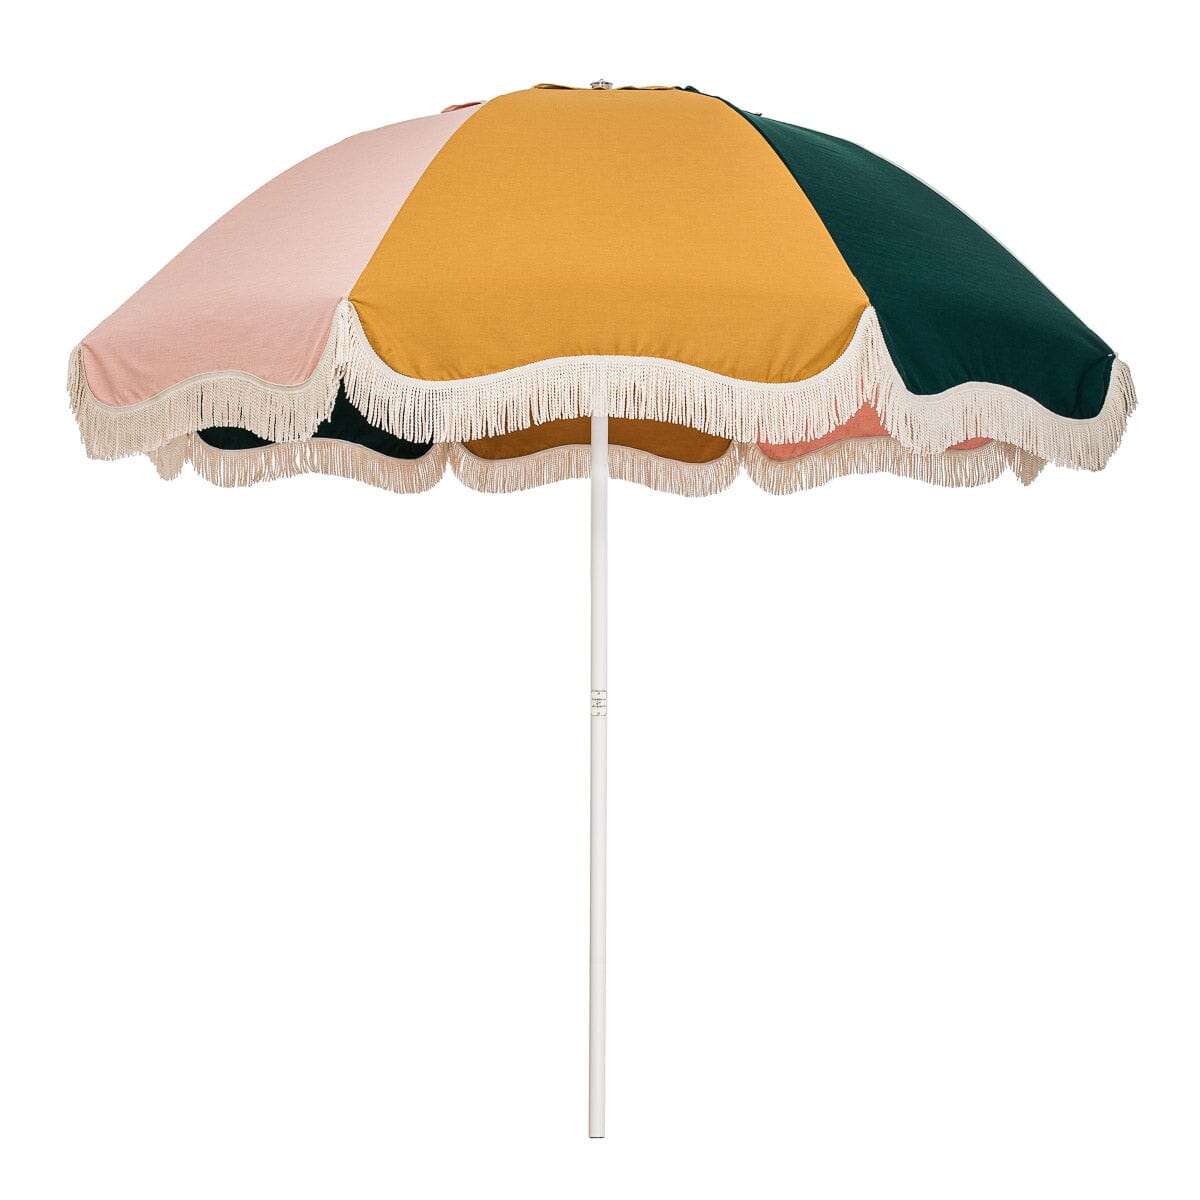 Colorful umbrella with fringe front facing on white background